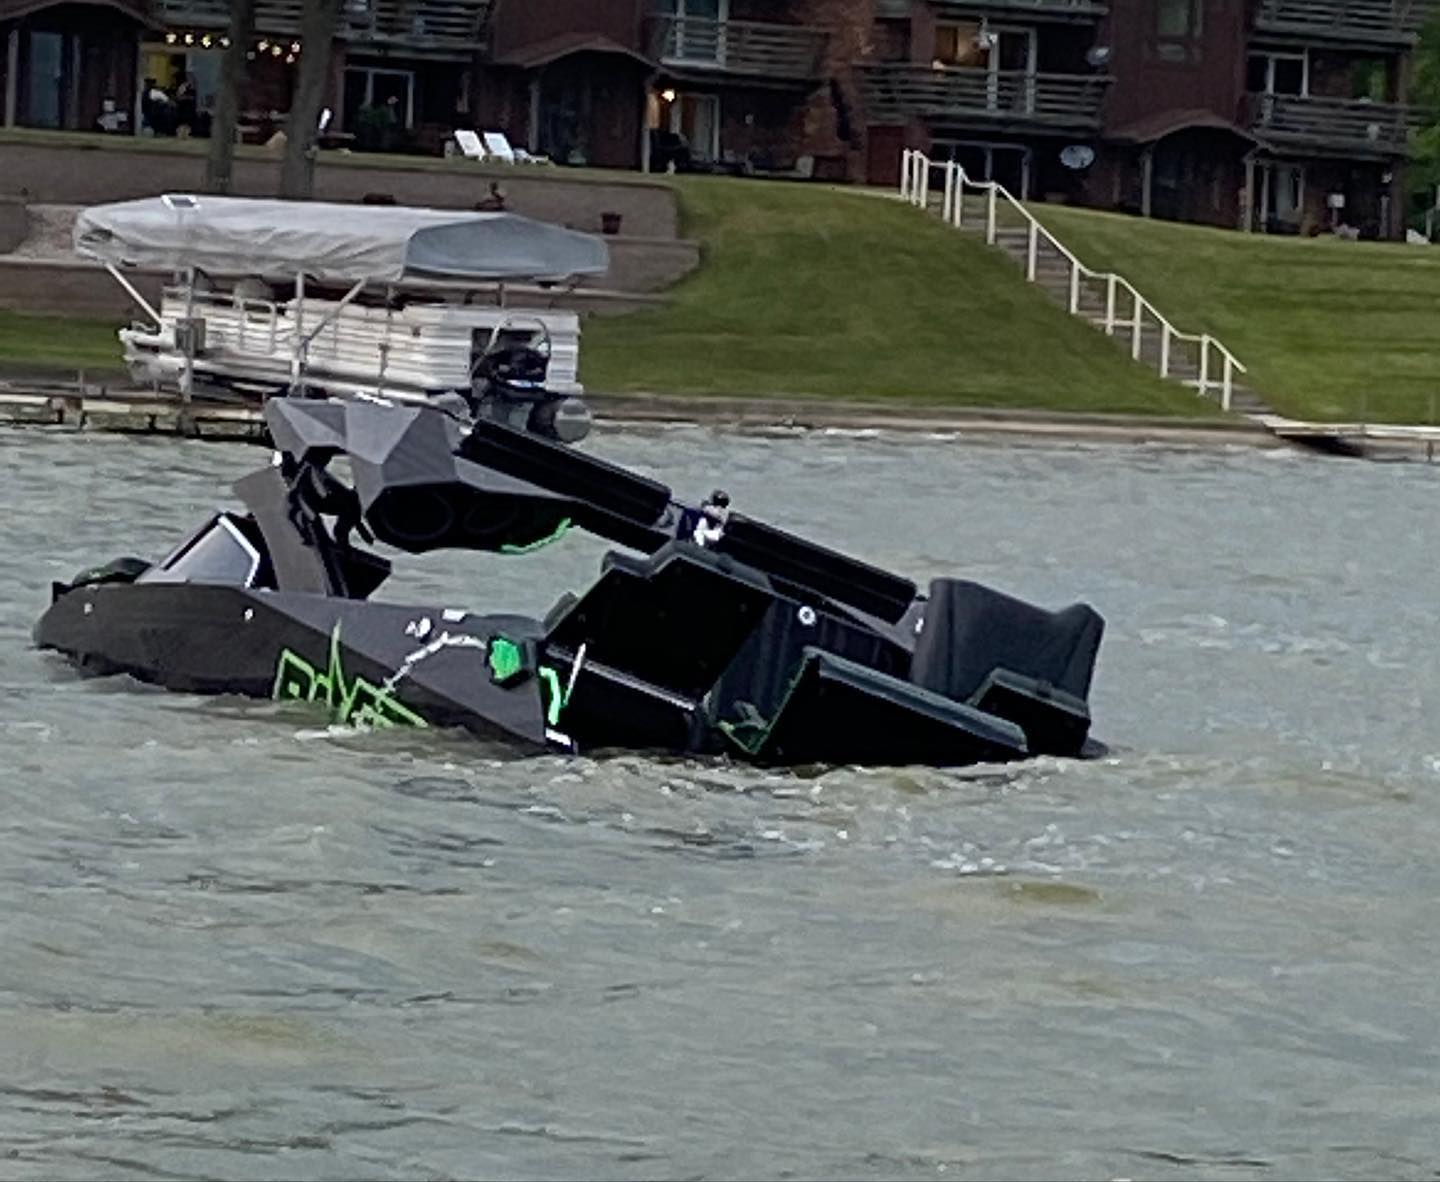 man sinks boat, then f-150 raptor and wrangler trying to